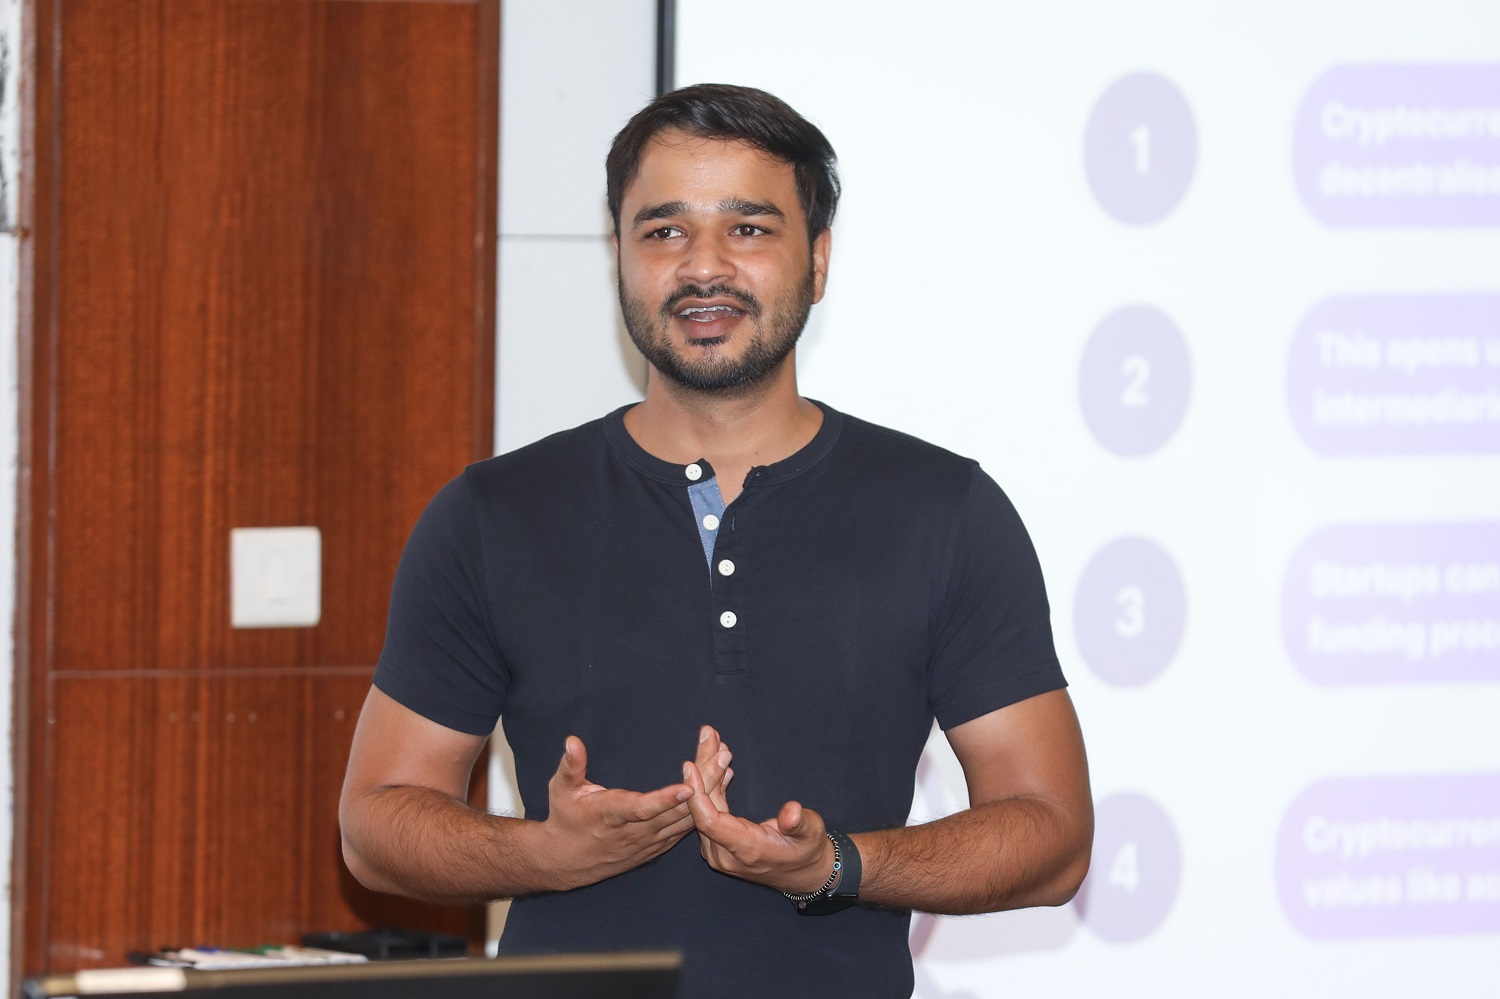 Suniel Meena, Head of Growth, Mudrex, addressed IIM Bangalore students on ‘How cryptocurrencies are enabling start-ups of the new era’, on 5th July 2023 during a seminar organized by the EPGP Seminar Committee.